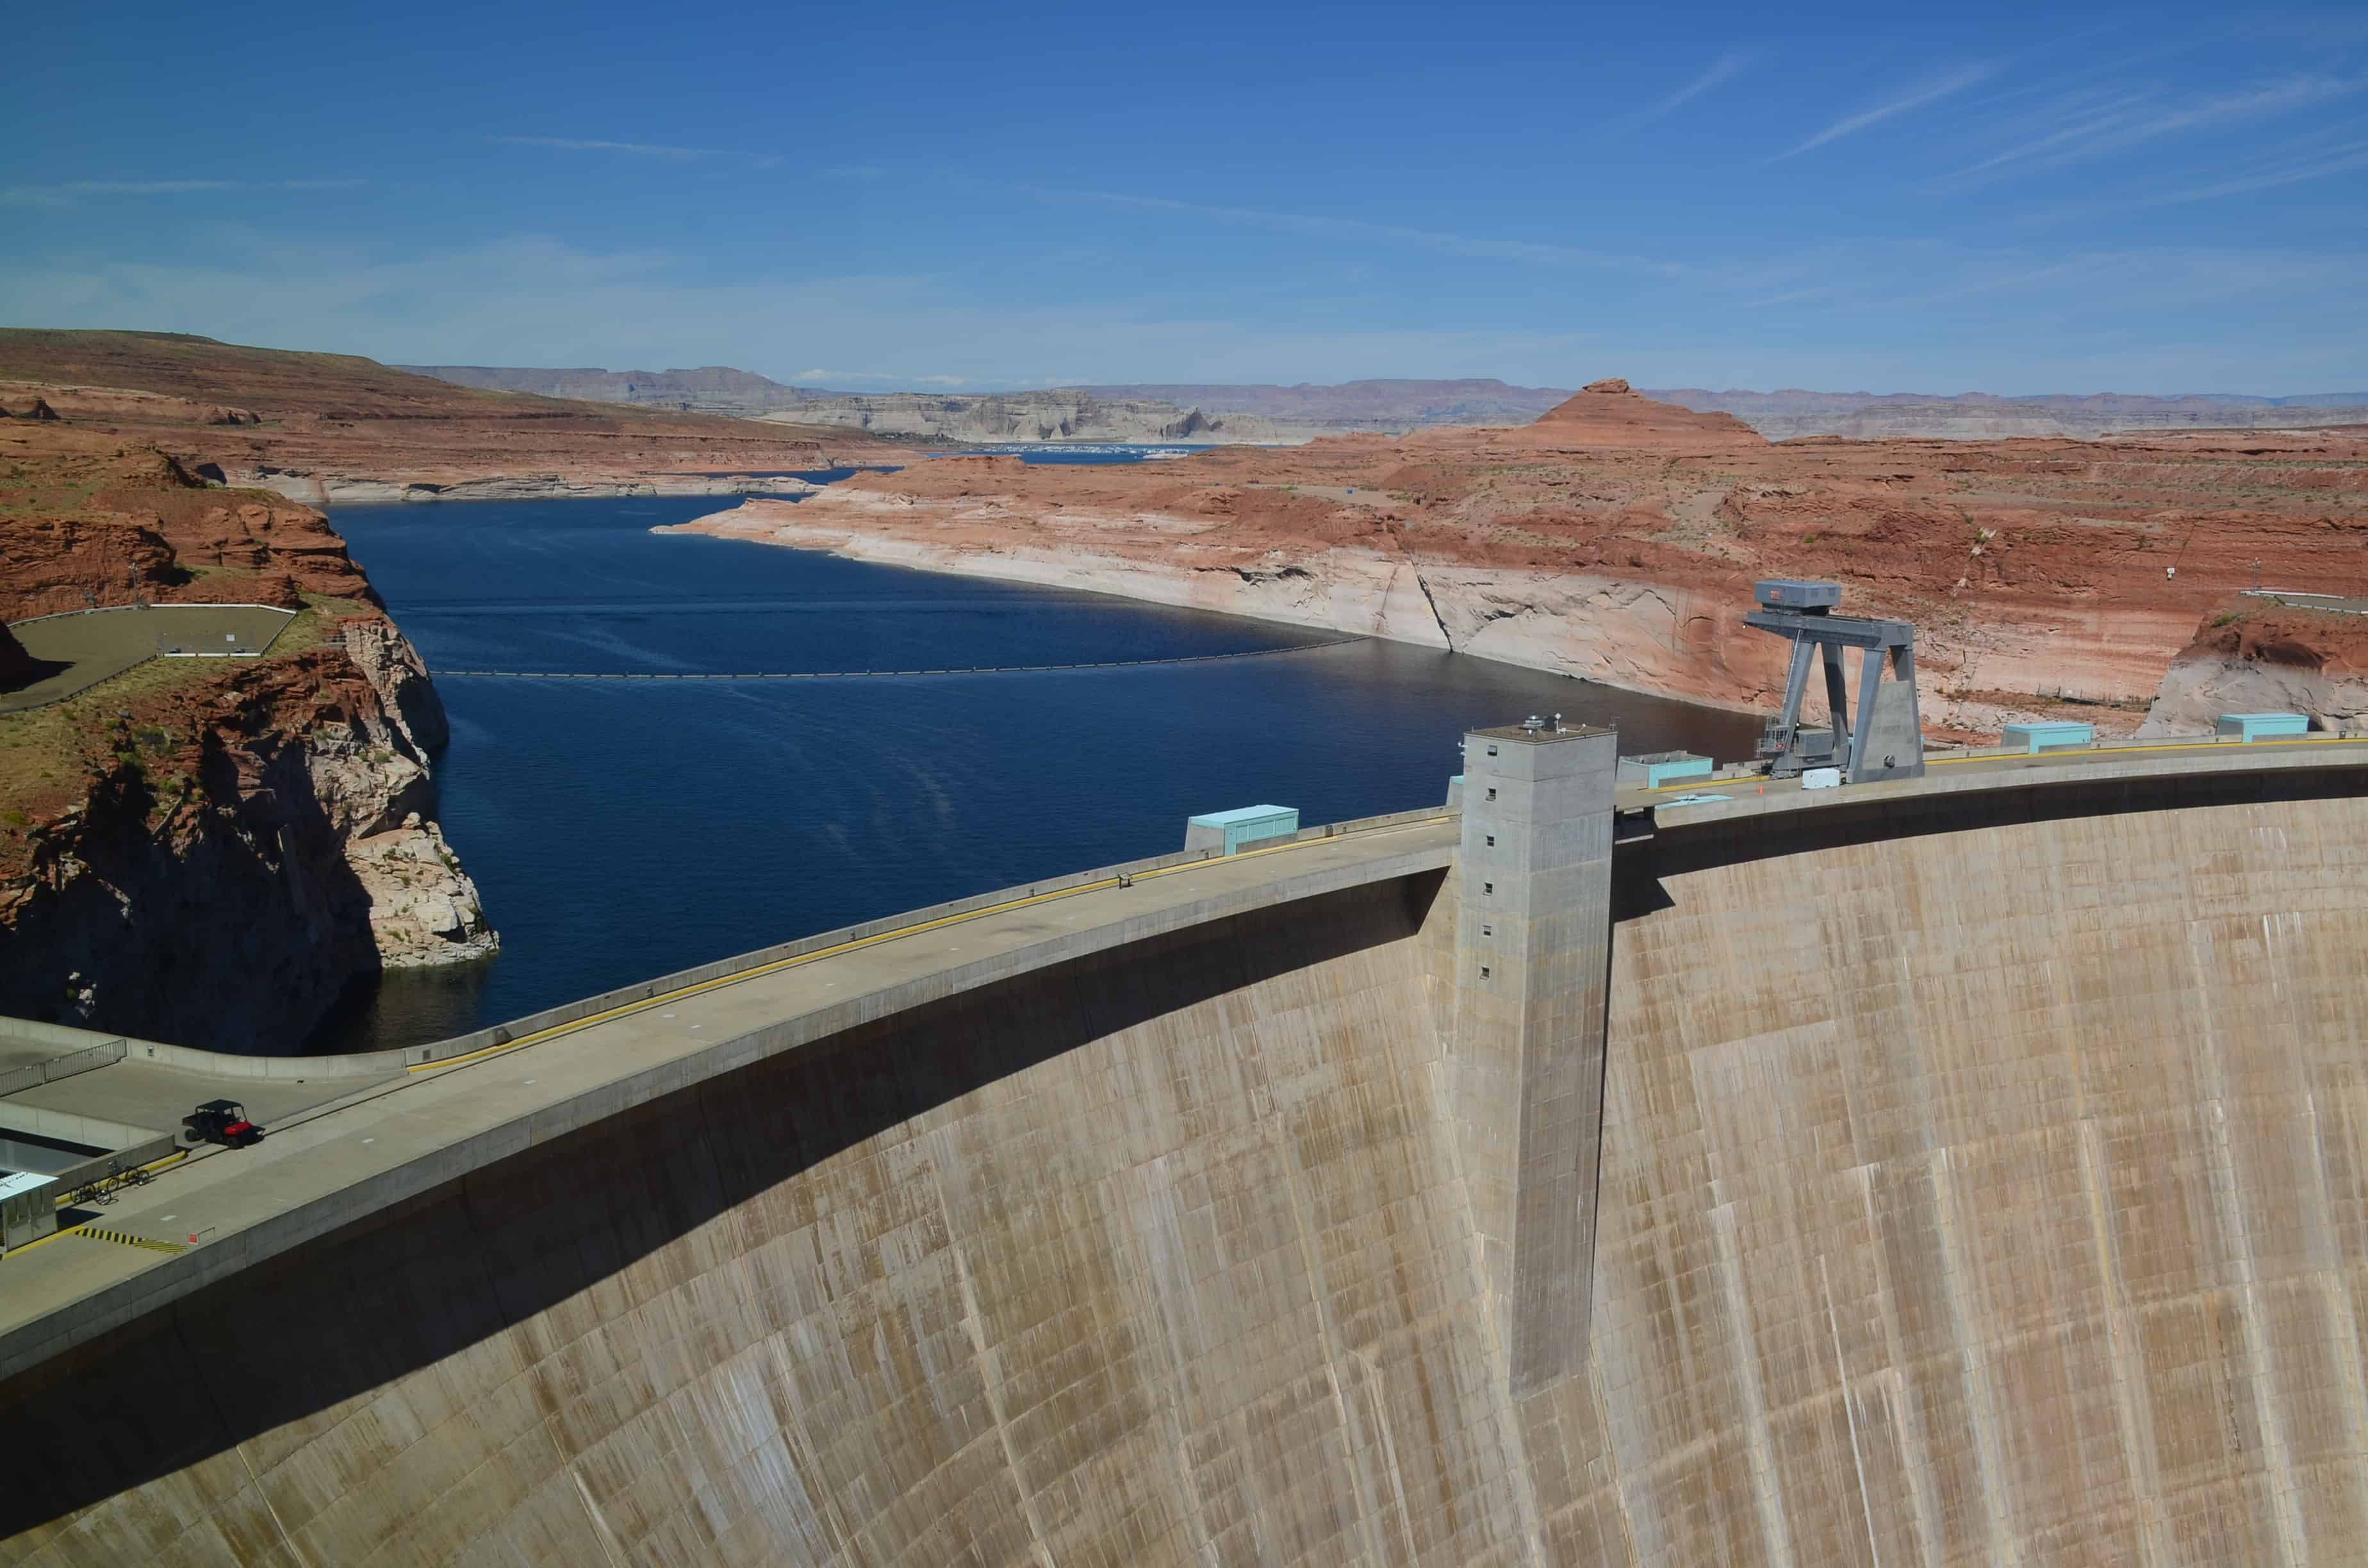 Looking over the top of Glen Canyon Dam to Lake Powell at Glen Canyon National Recreation Area in Arizona